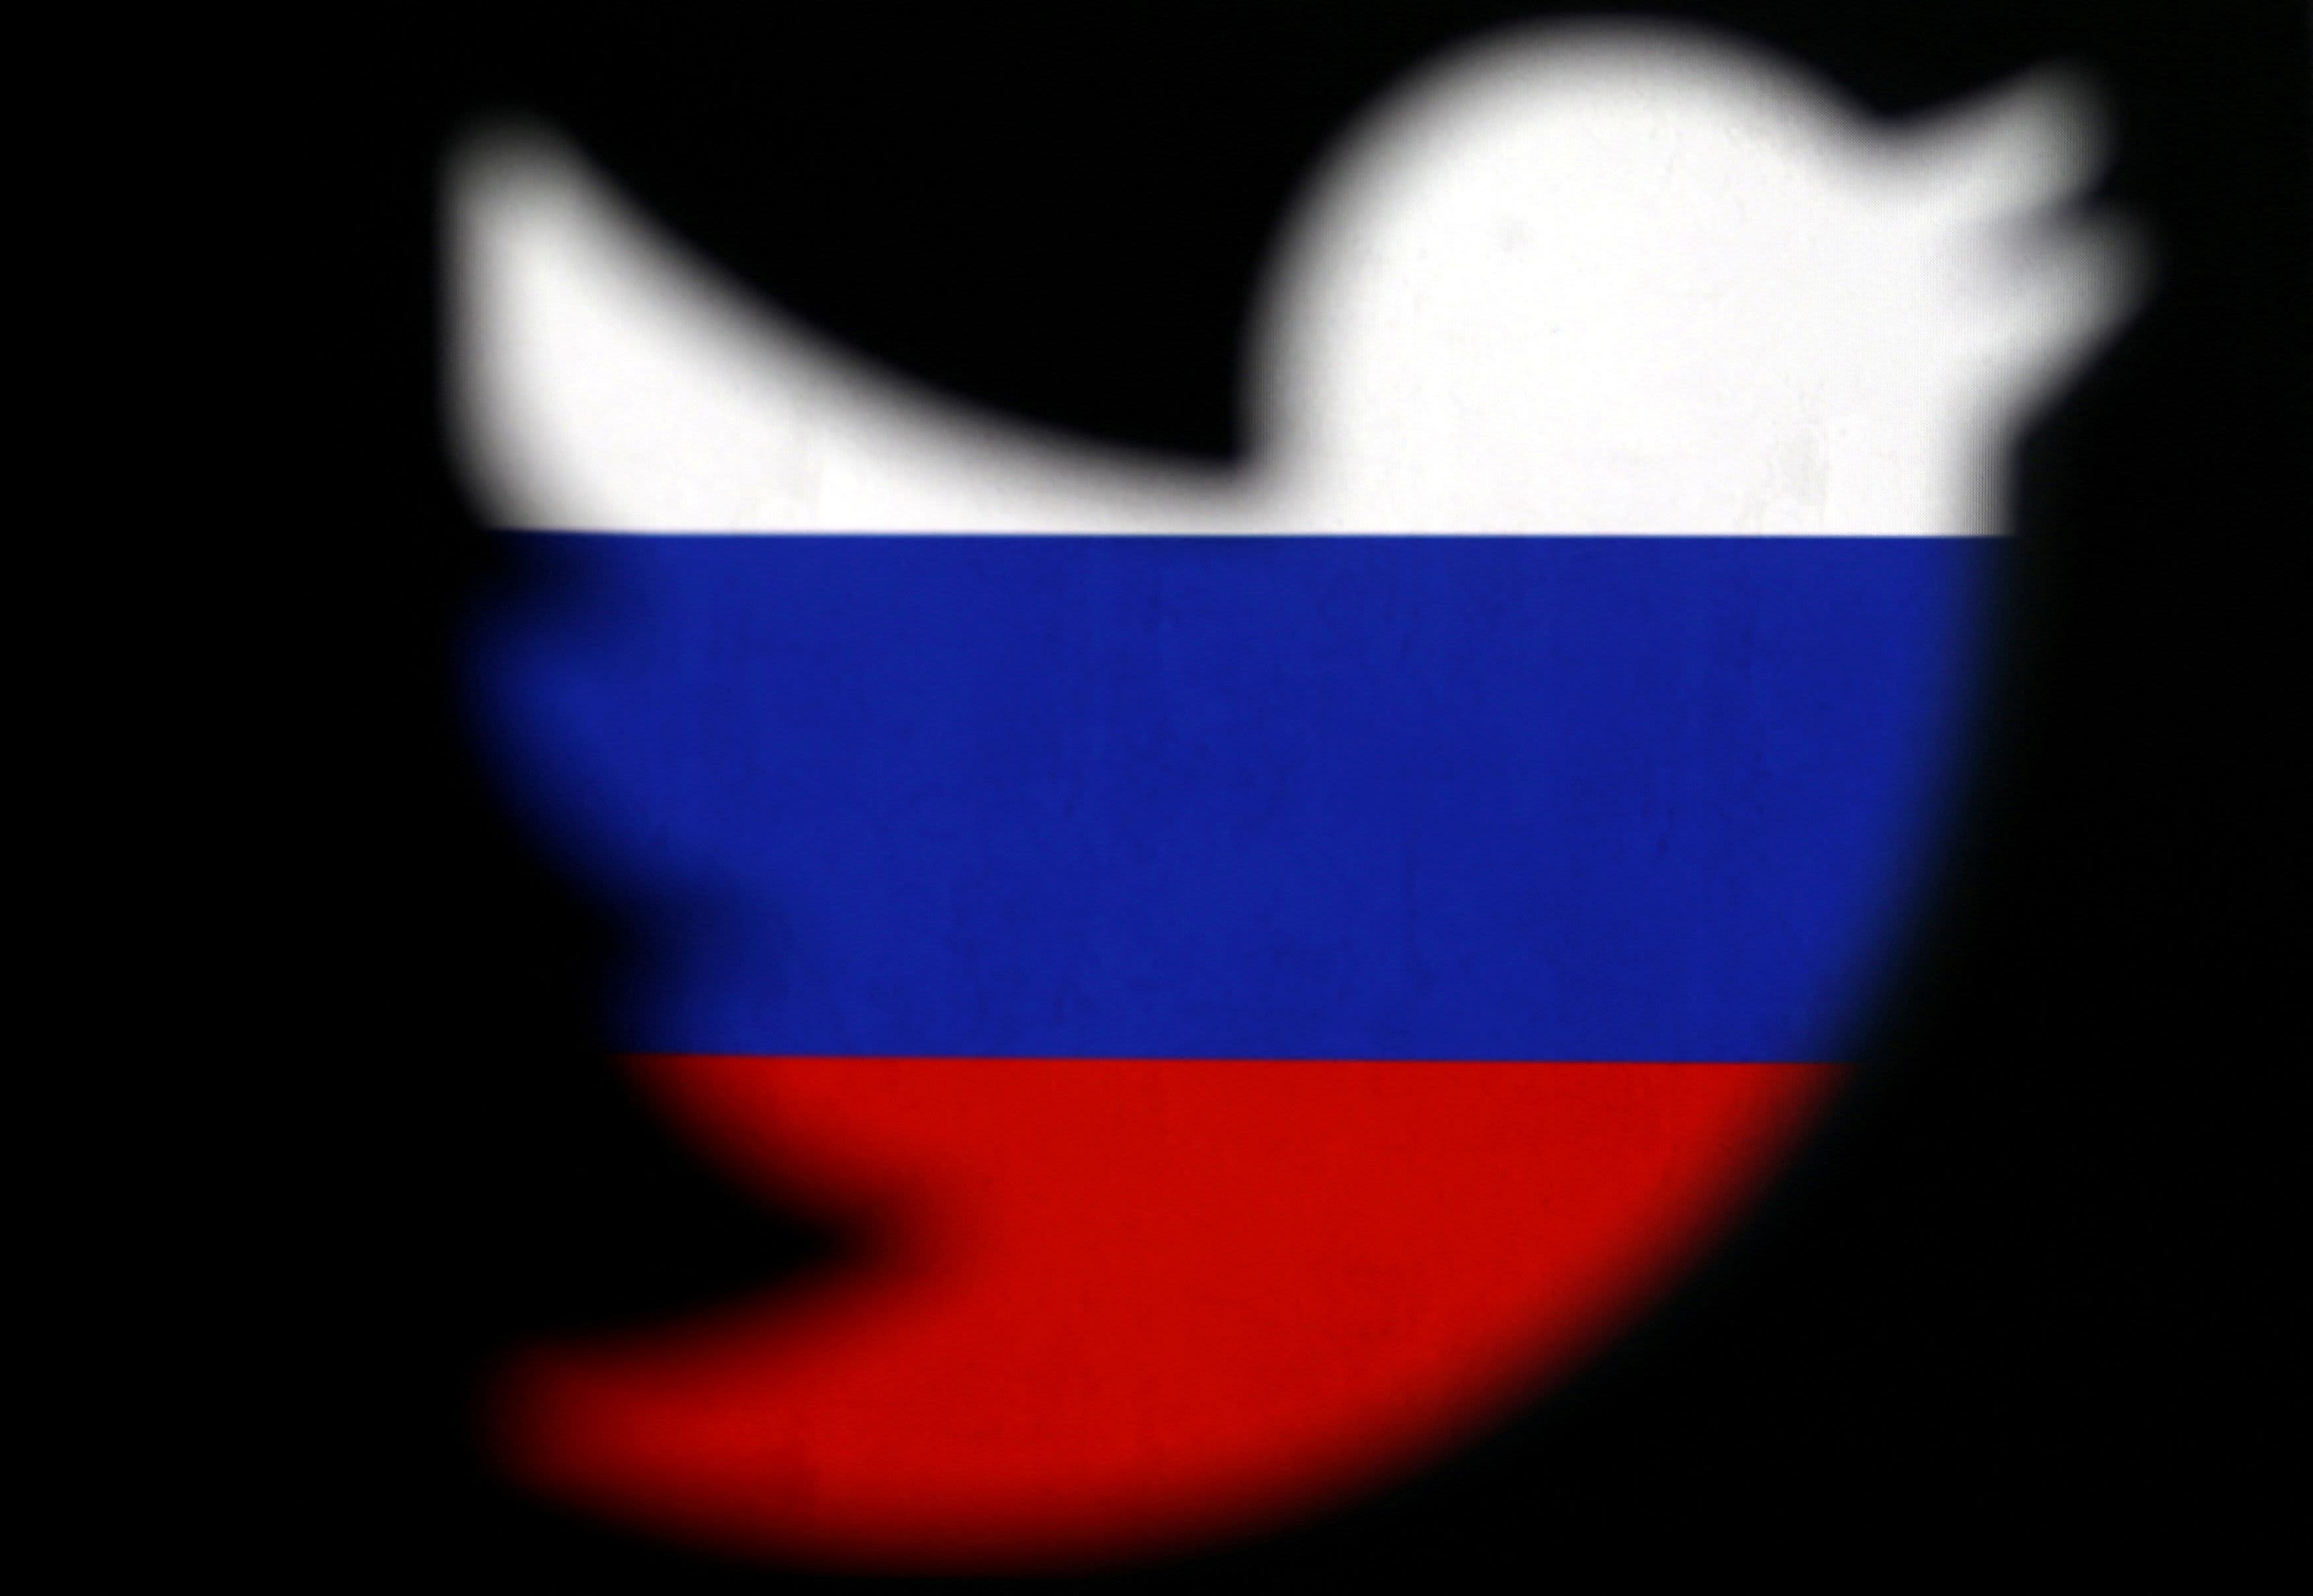 Twitter removes tweets by Russian Embassy in United Kingdom for denying ‘violent events’ in Ukraine